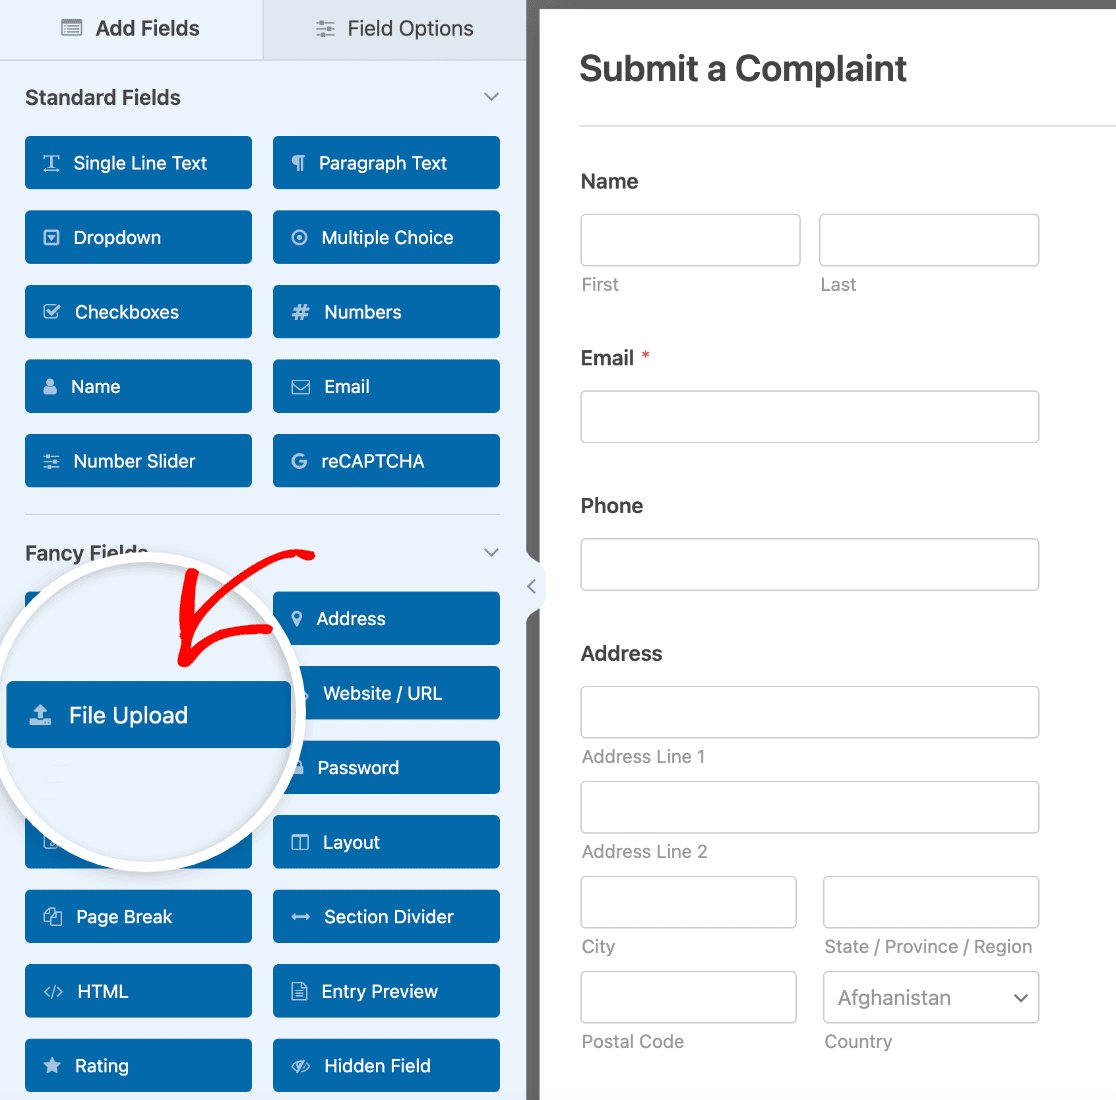 Adding a File Upload field to a complaint form